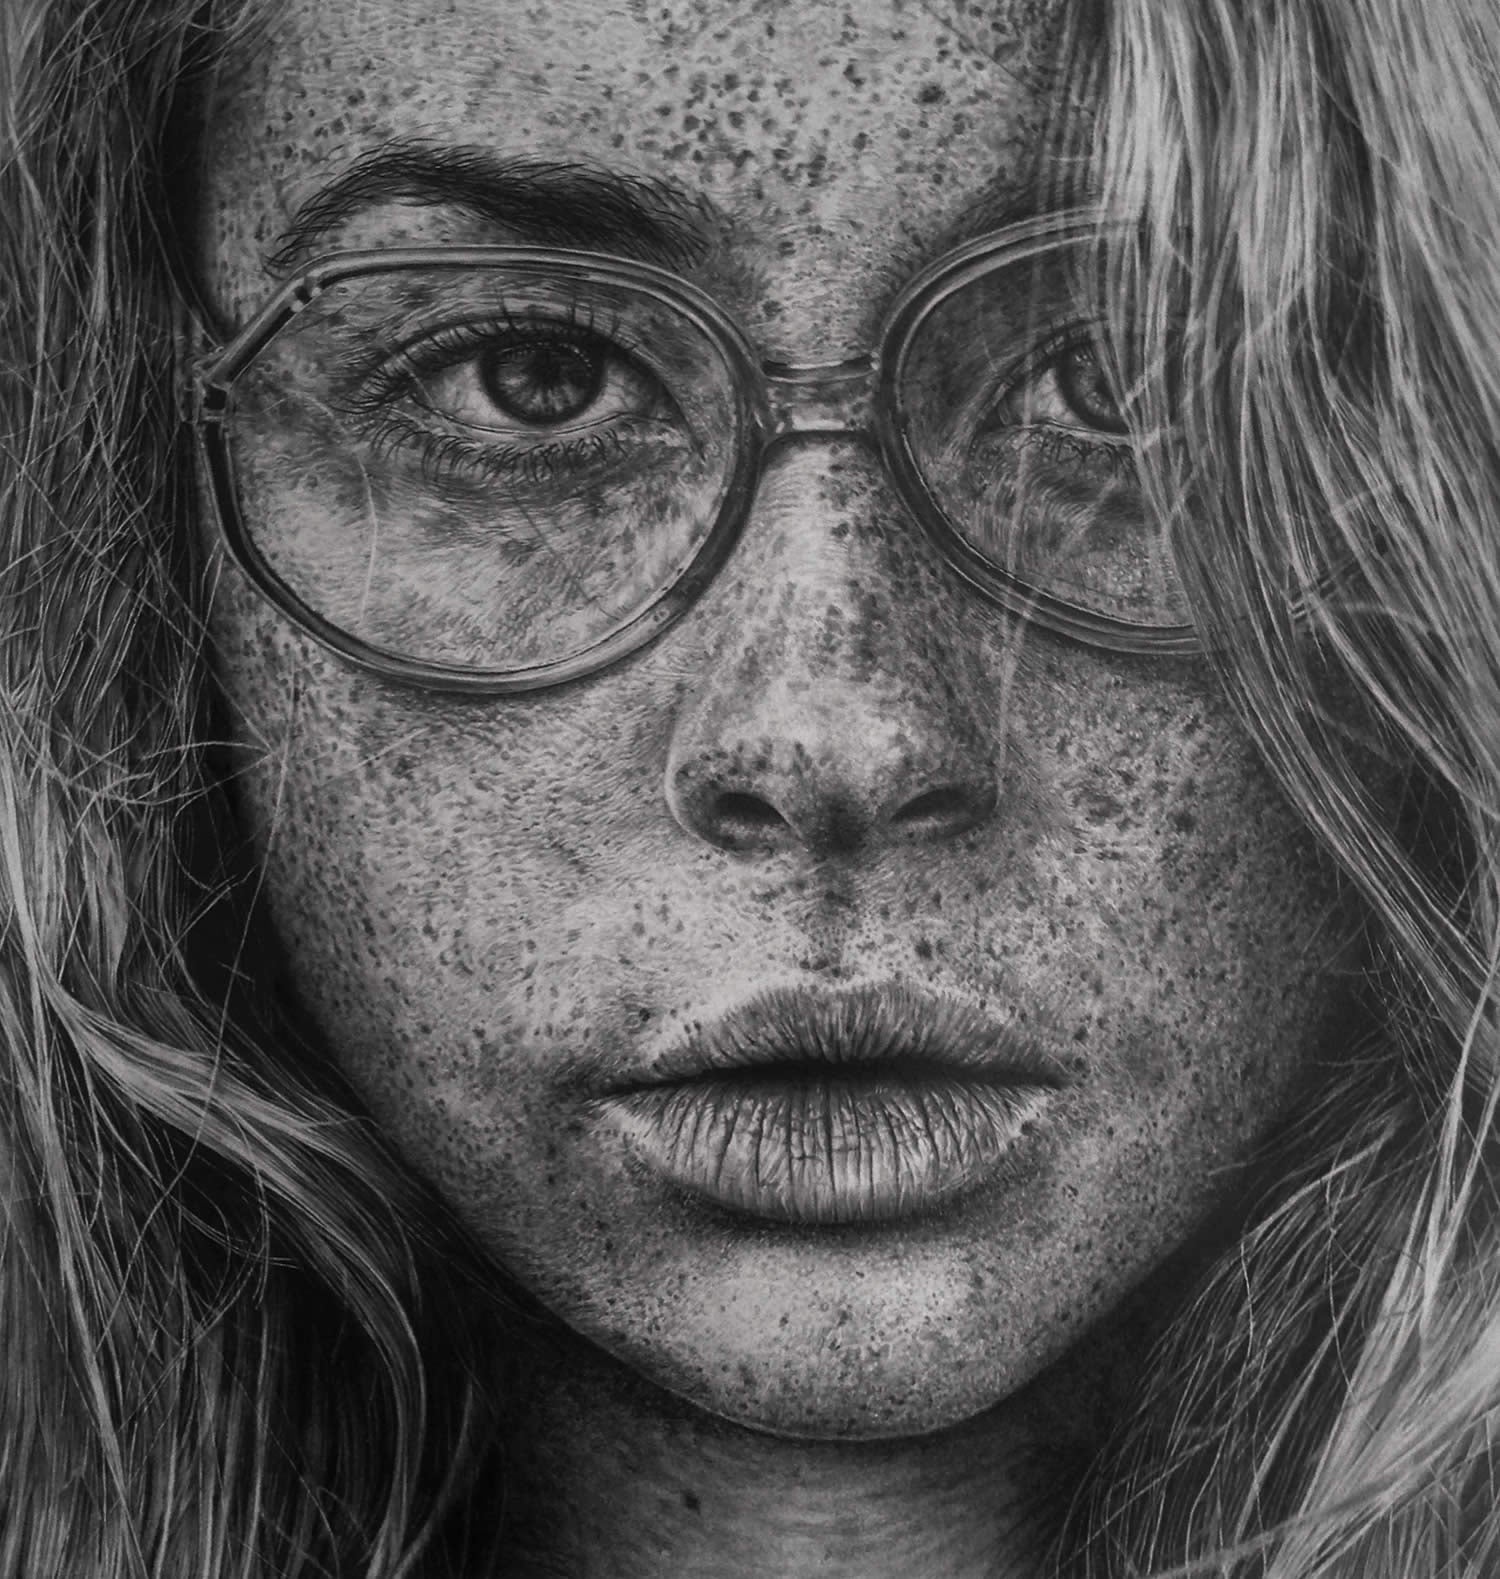 Hyperrealistic Graphite Drawings Are Indistinguishable From Photos